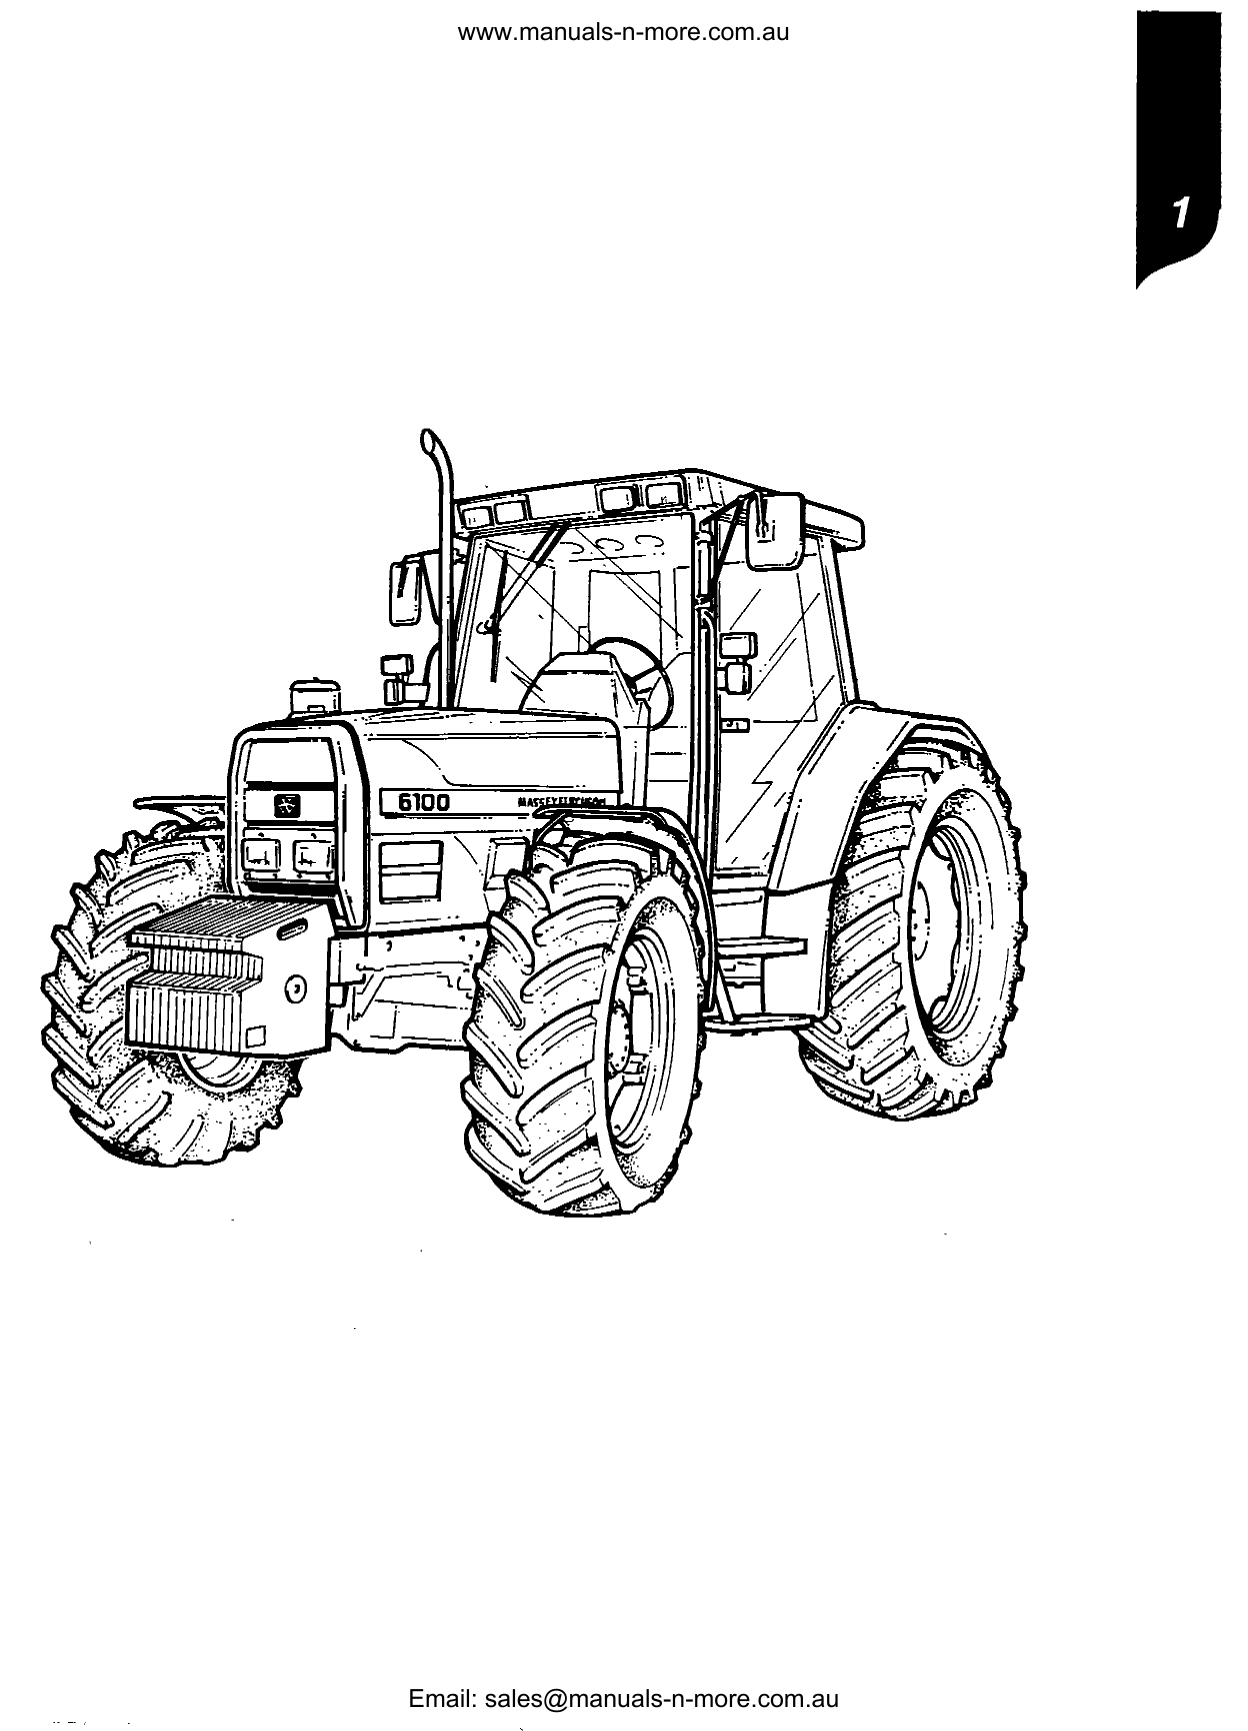 Massey Ferguson 6120, 6130, 6140, 6150, 6160, 6170, 6180, 6190 utility tractor workshop service manual Preview image 4